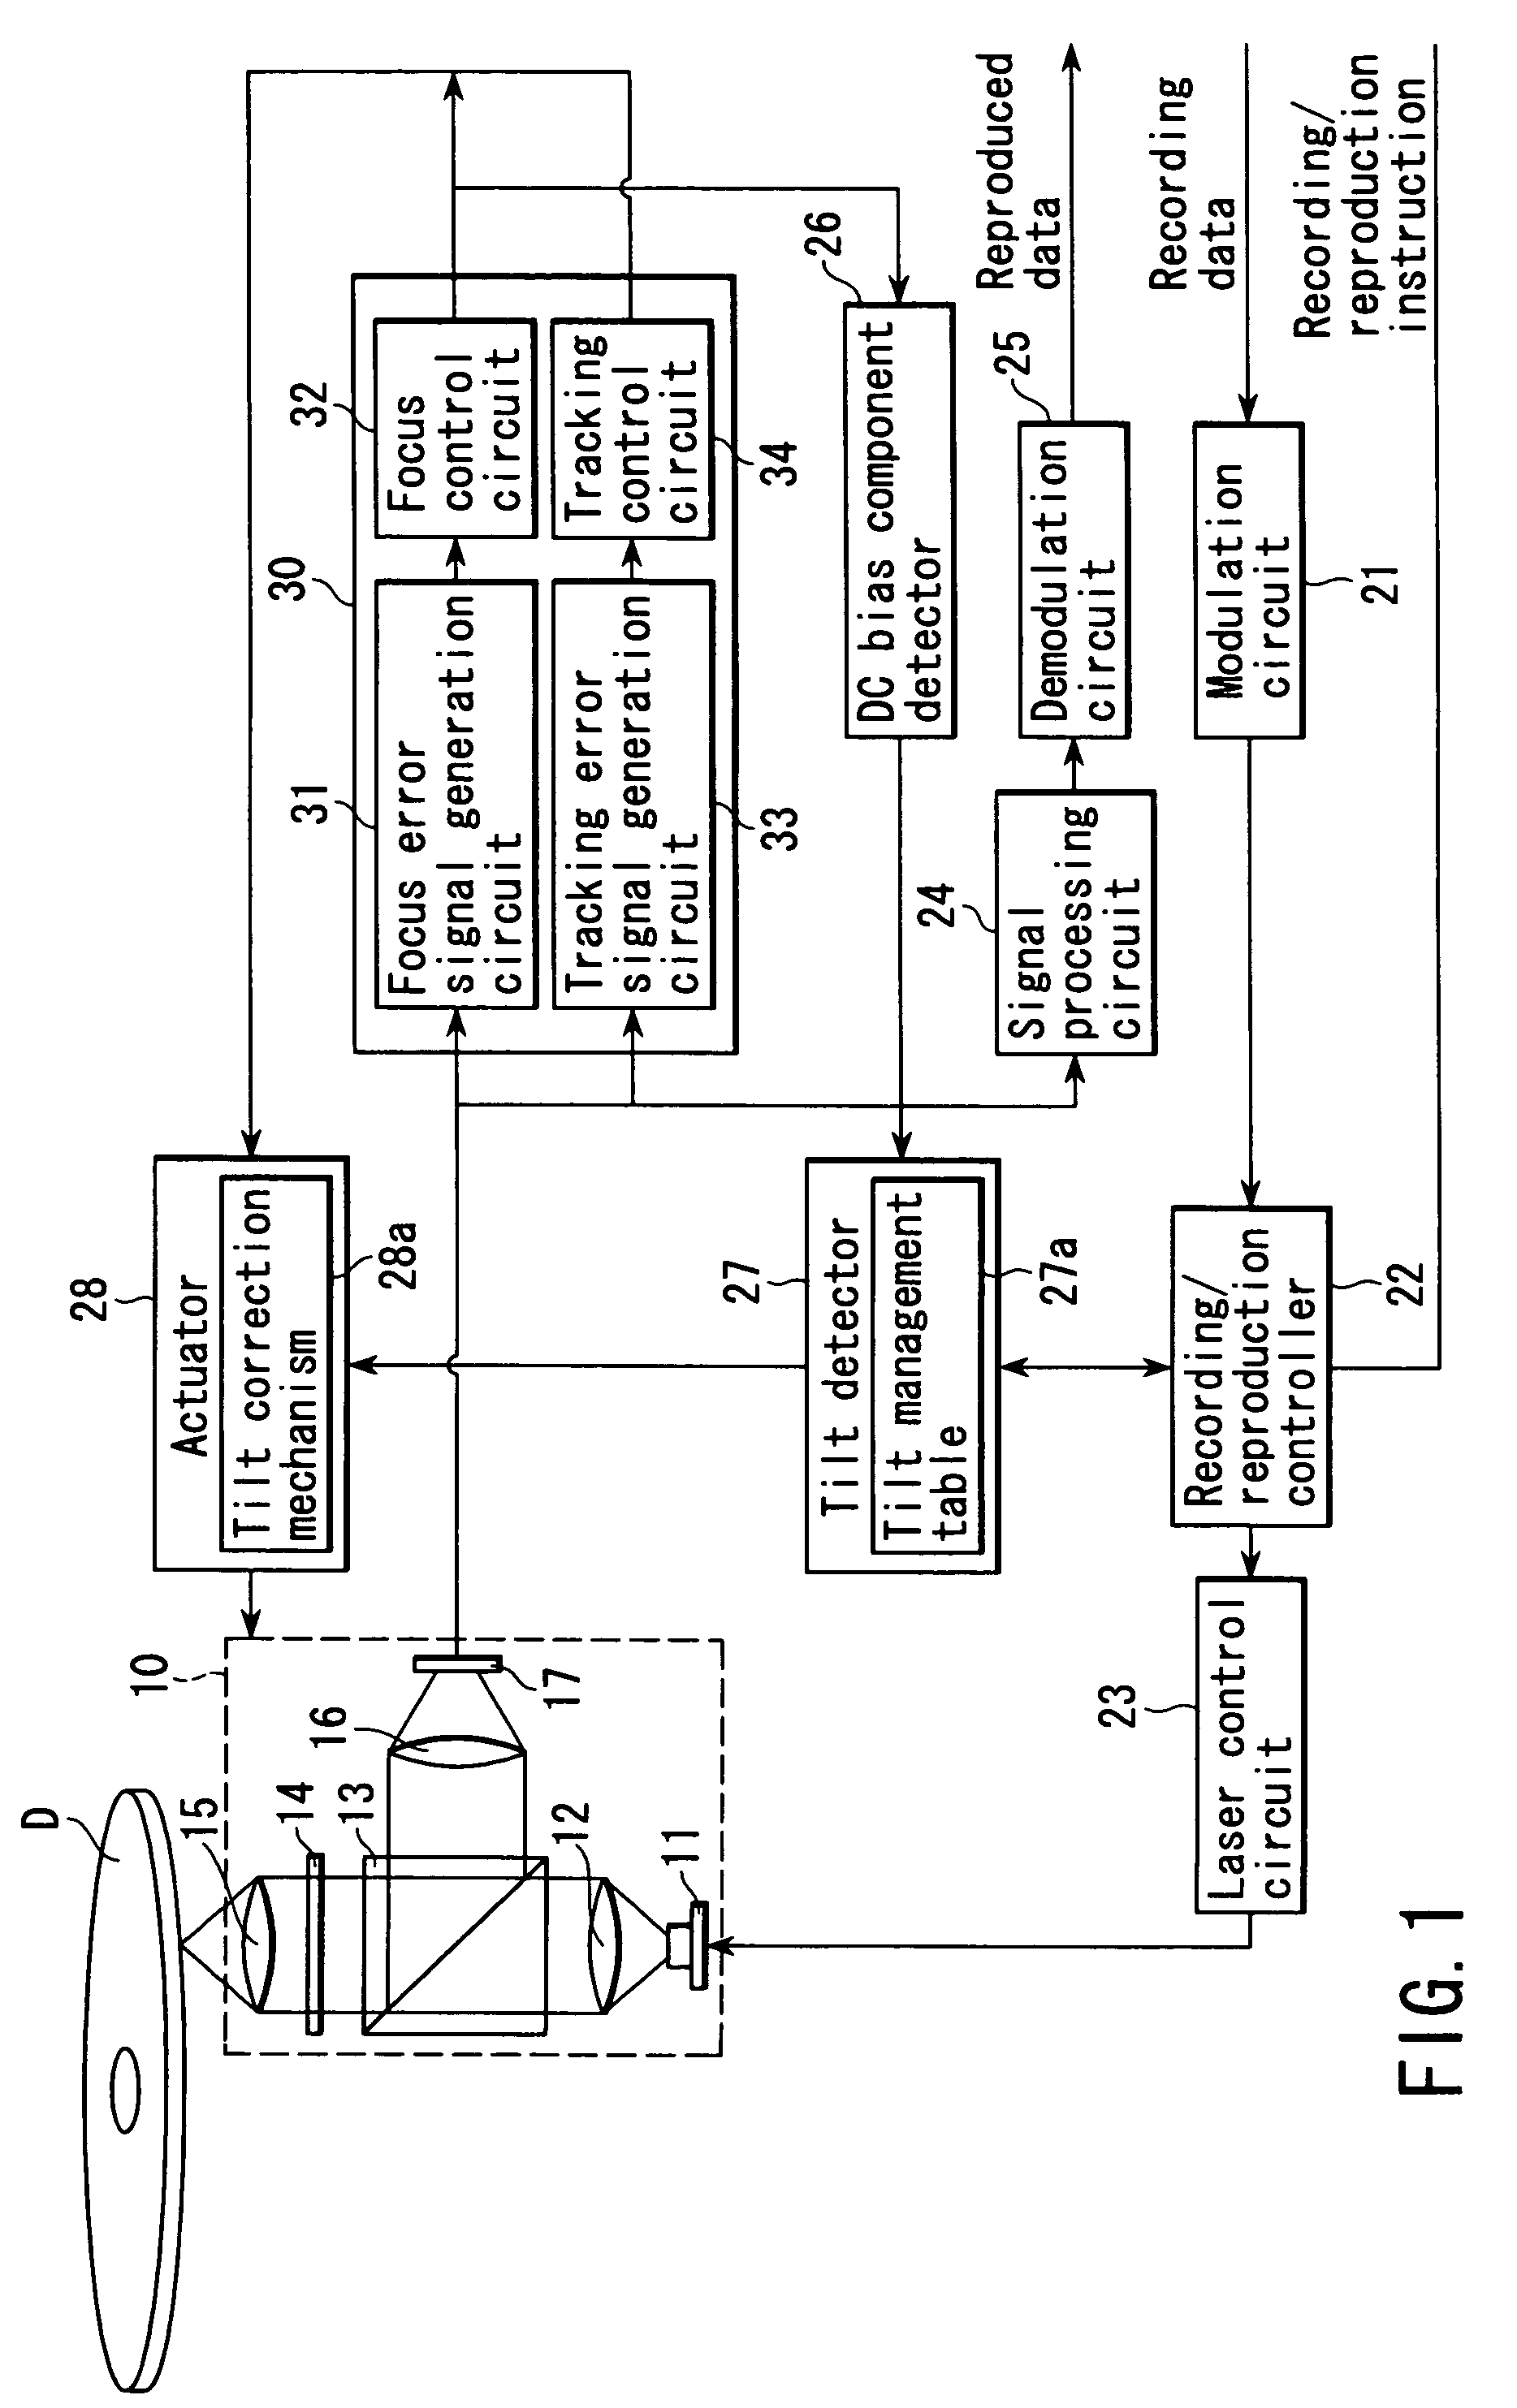 Disk apparatus, data recording method, and data reproduction method for continuous data processing